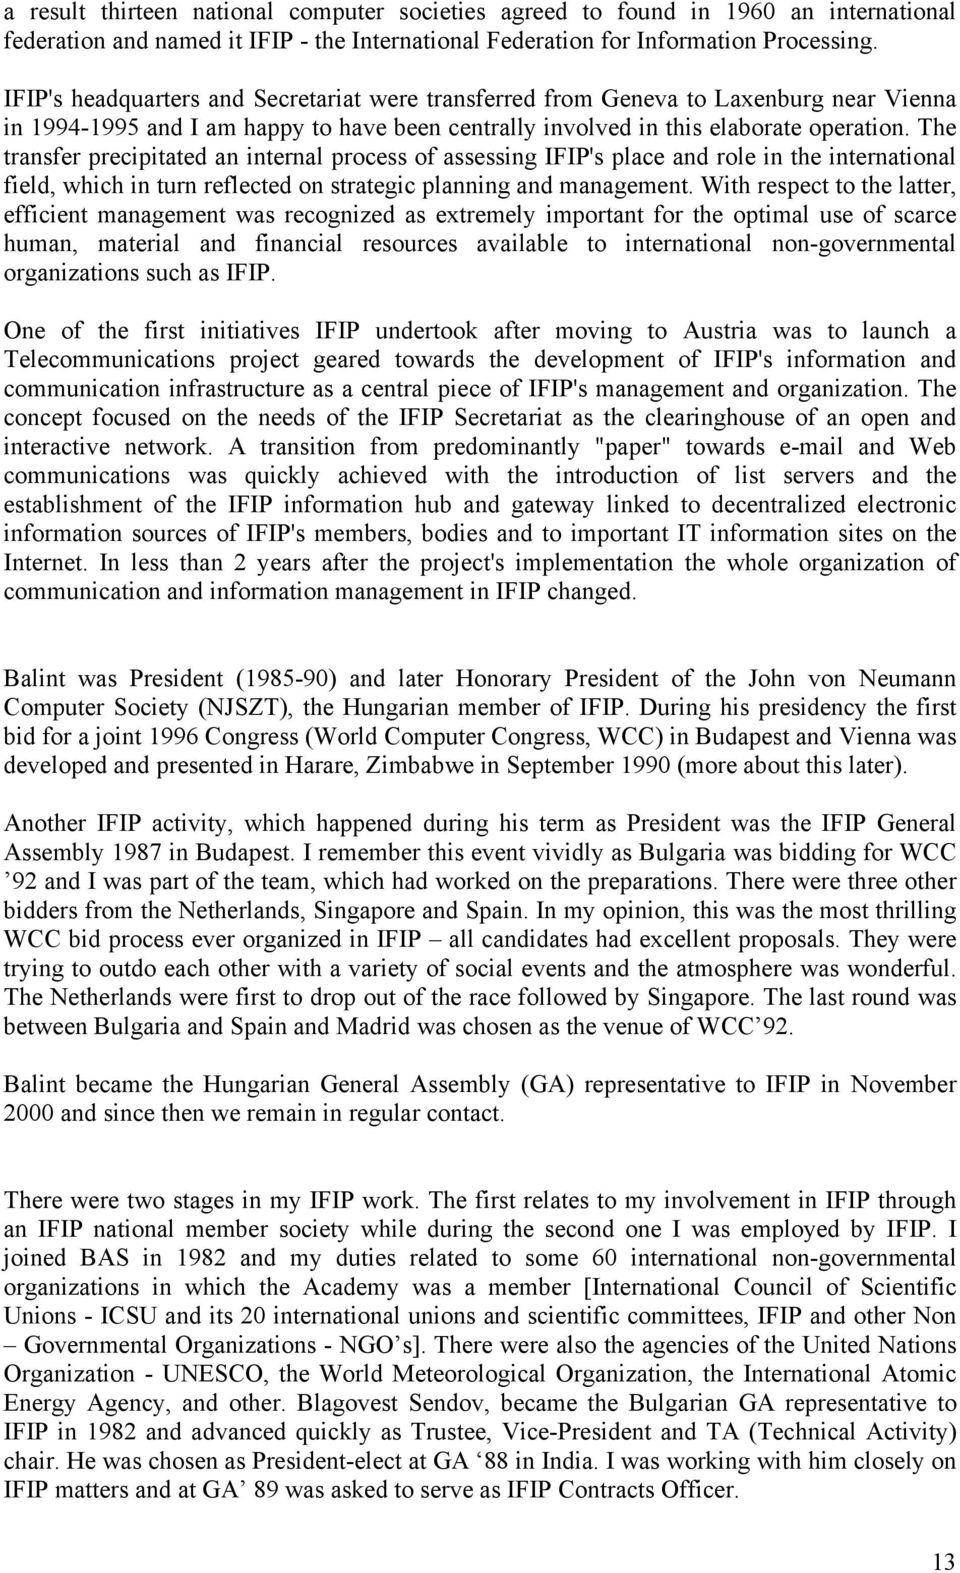 The transfer precipitated an internal process of assessing IFIP's place and role in the international field, which in turn reflected on strategic planning and management.